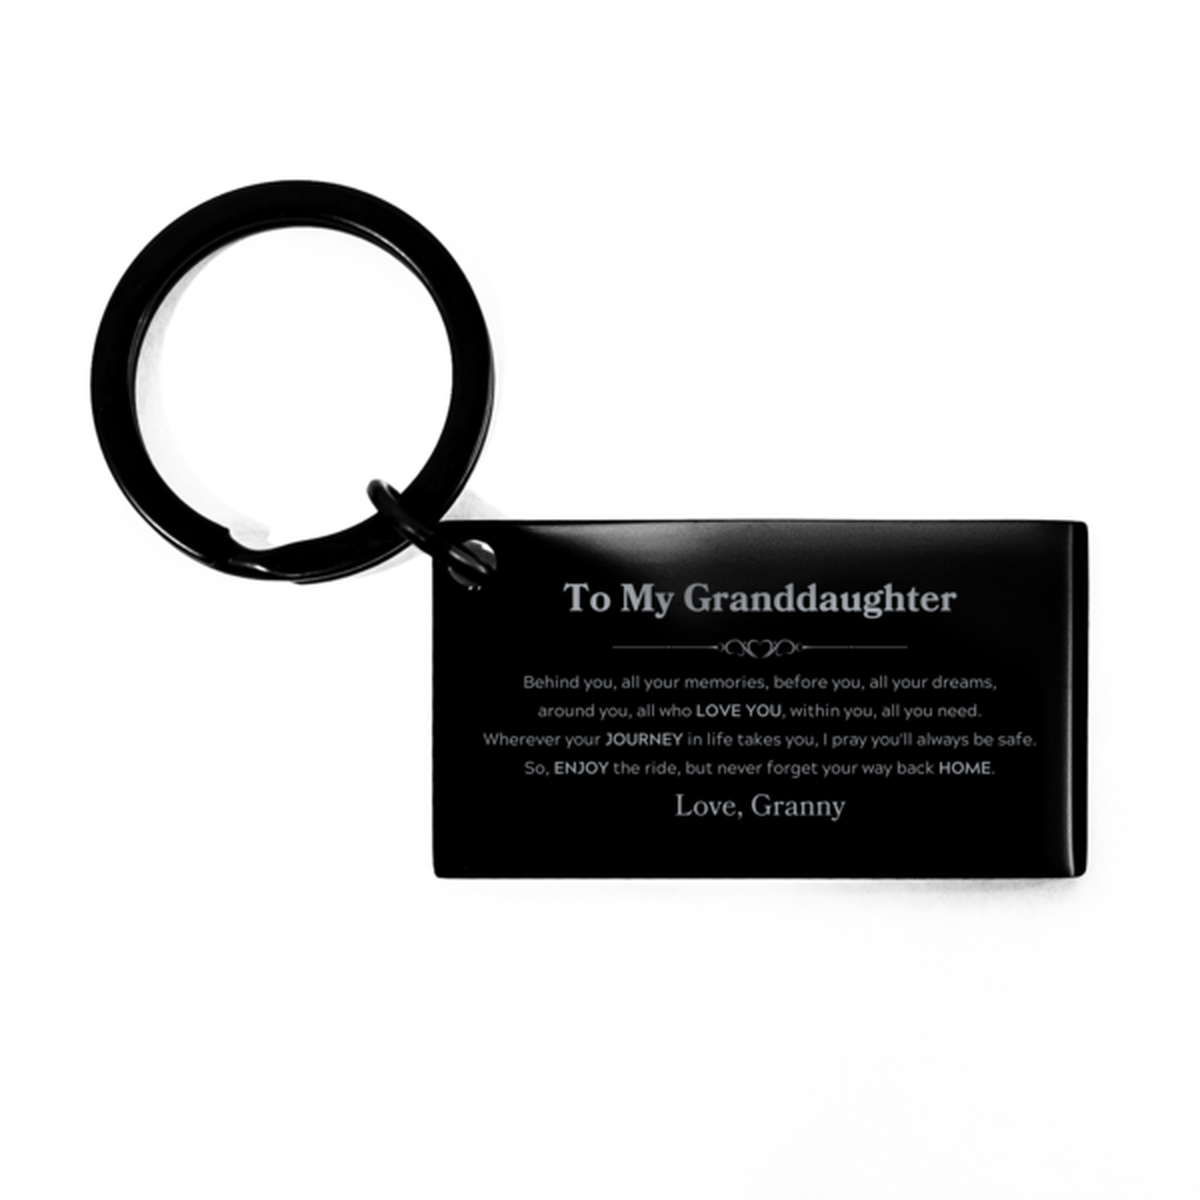 To My Granddaughter Graduation Gifts from Granny, Granddaughter Keychain Christmas Birthday Gifts for Granddaughter Behind you, all your memories, before you, all your dreams. Love, Granny